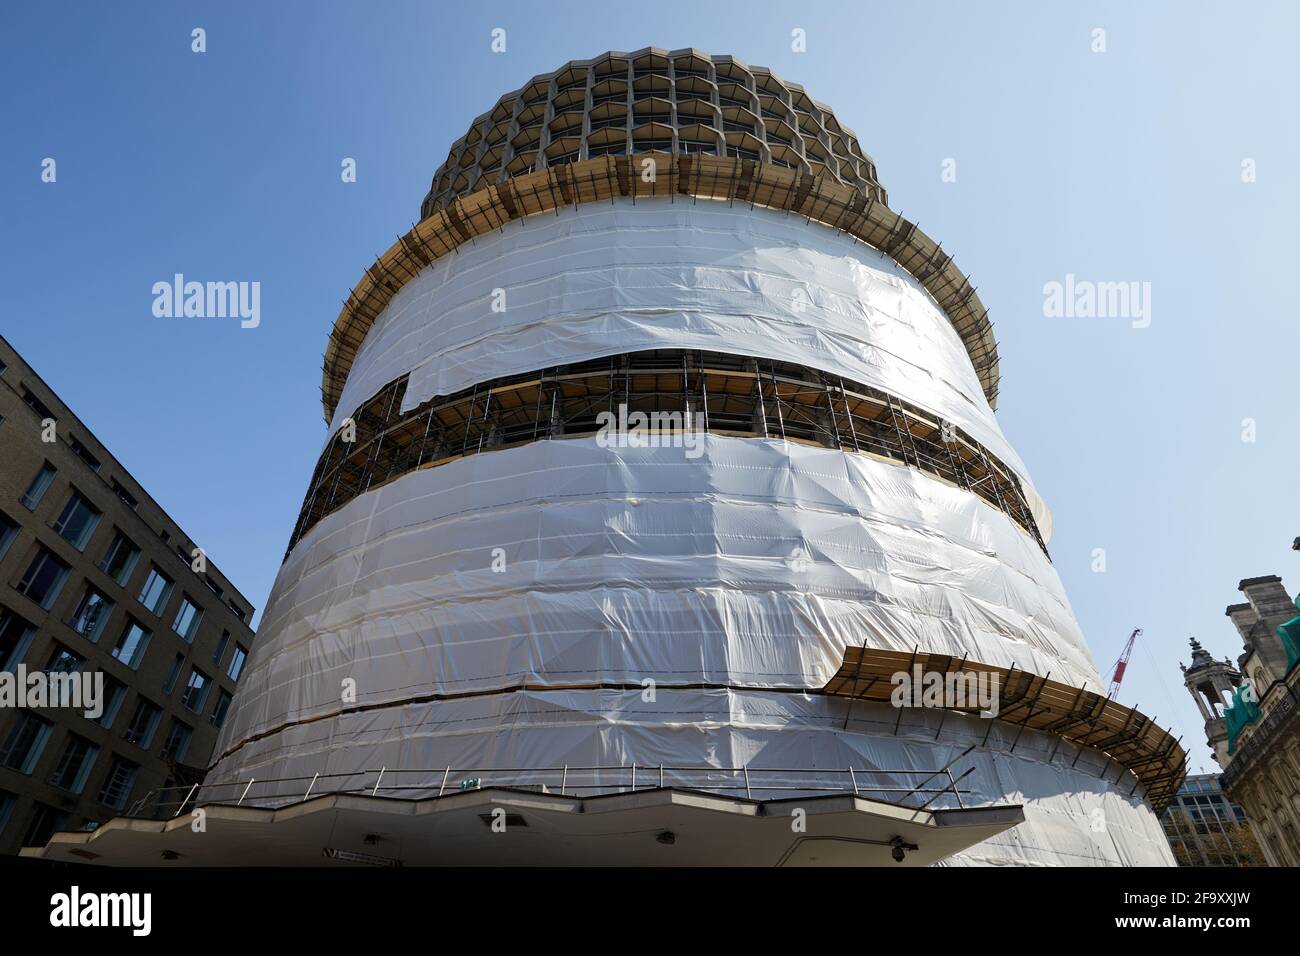 London, UK - 20 Apr 2021:  Space House, a 17-storey cylindrical  office tower in the Holborn area, partially wrapped in protective sheeting. Stock Photo